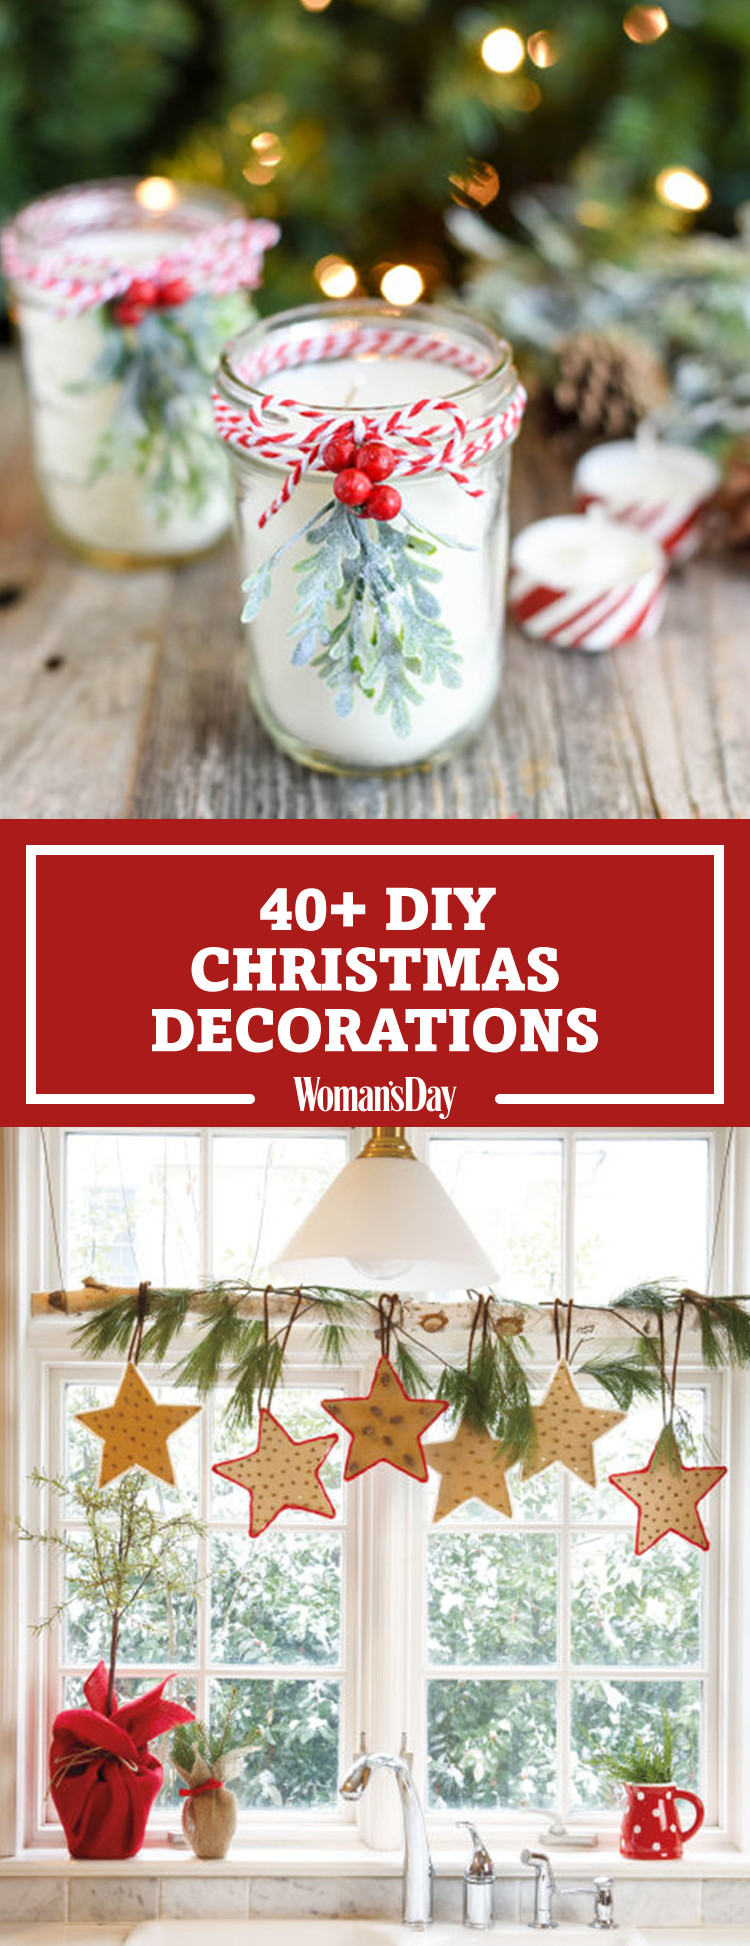 DIY Holiday Decorations
 47 Easy DIY Christmas Decorations Homemade Ideas for